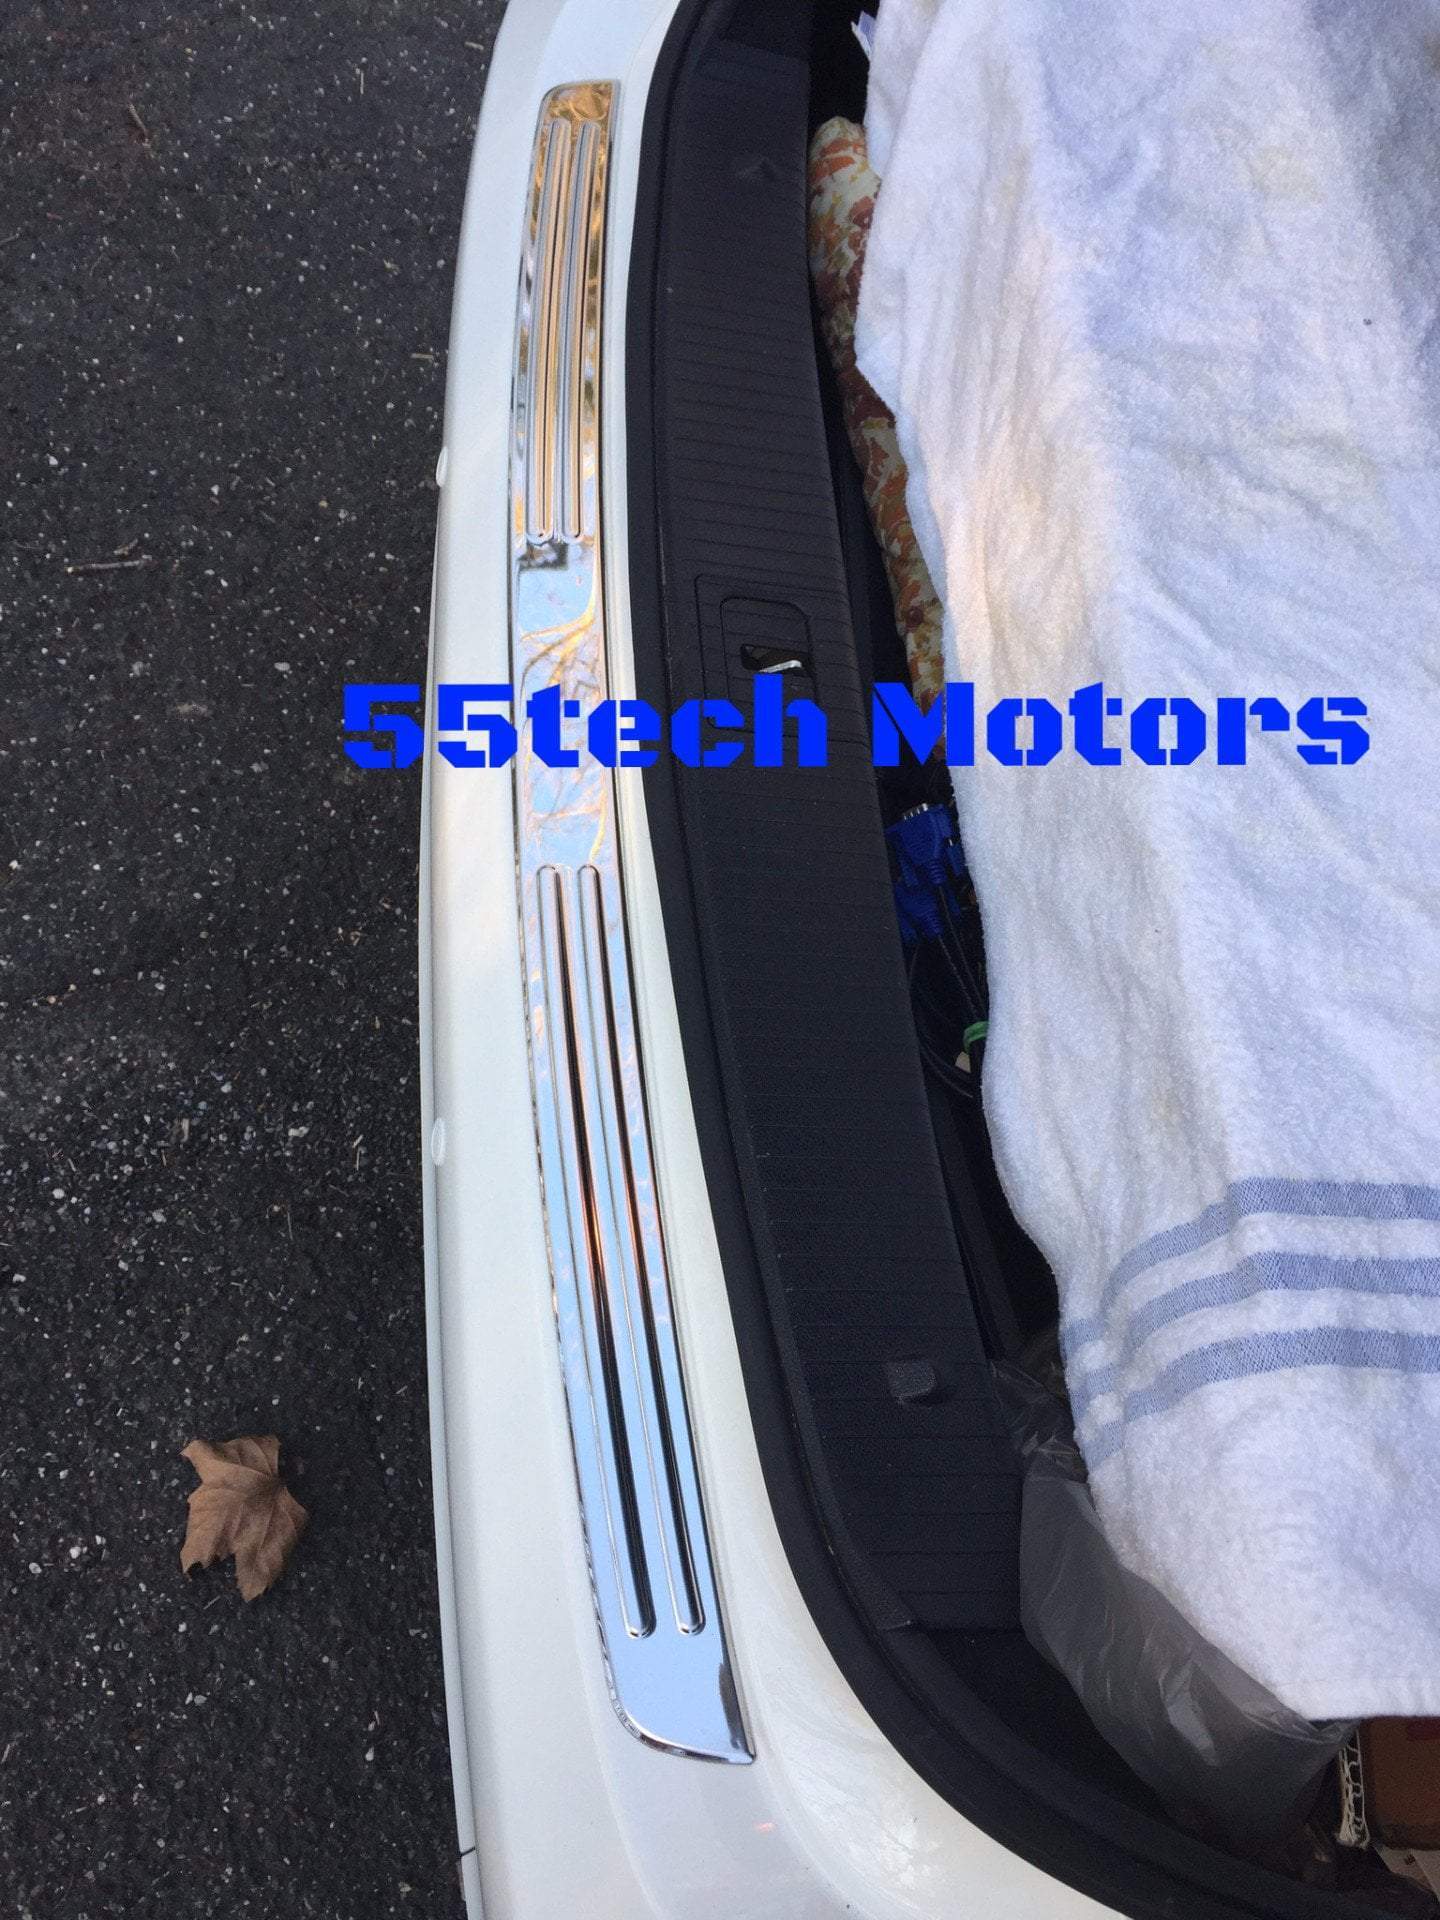 W212 Trunk Stainless protection panel 304 SS - 55tech Motors